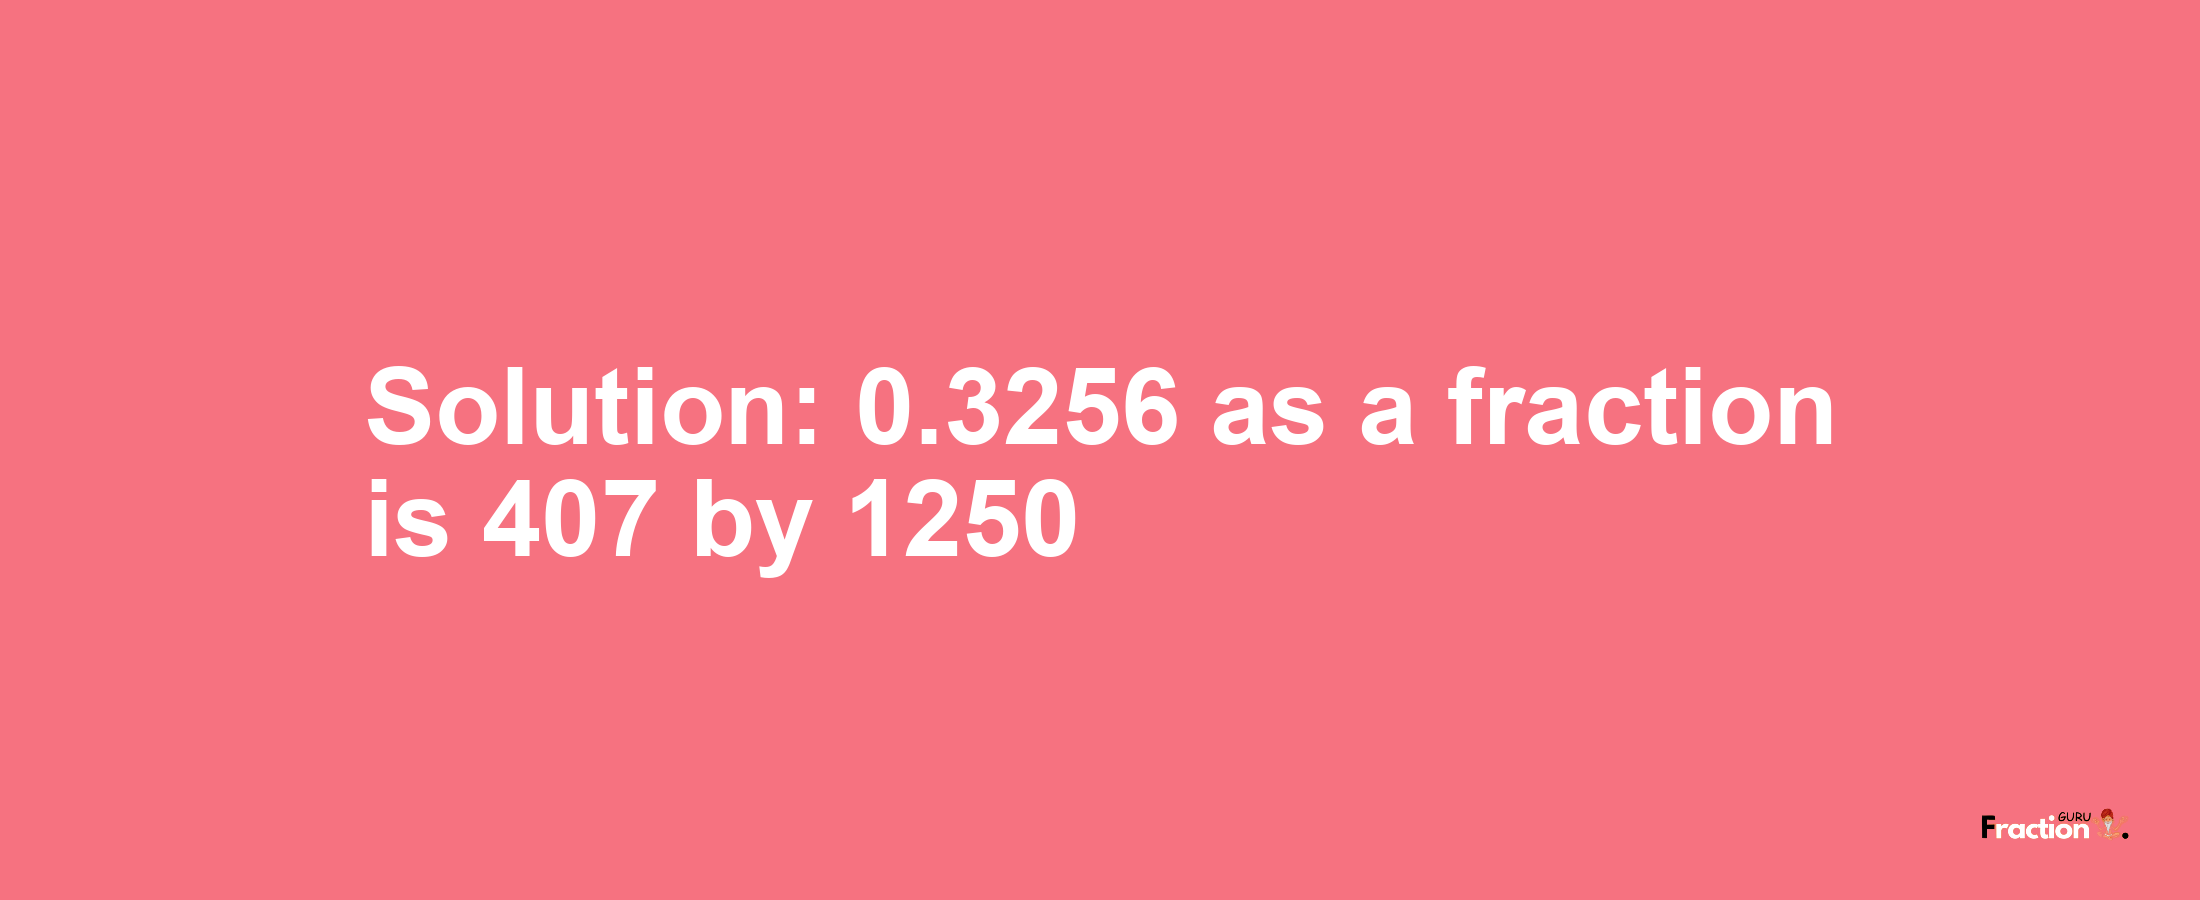 Solution:0.3256 as a fraction is 407/1250